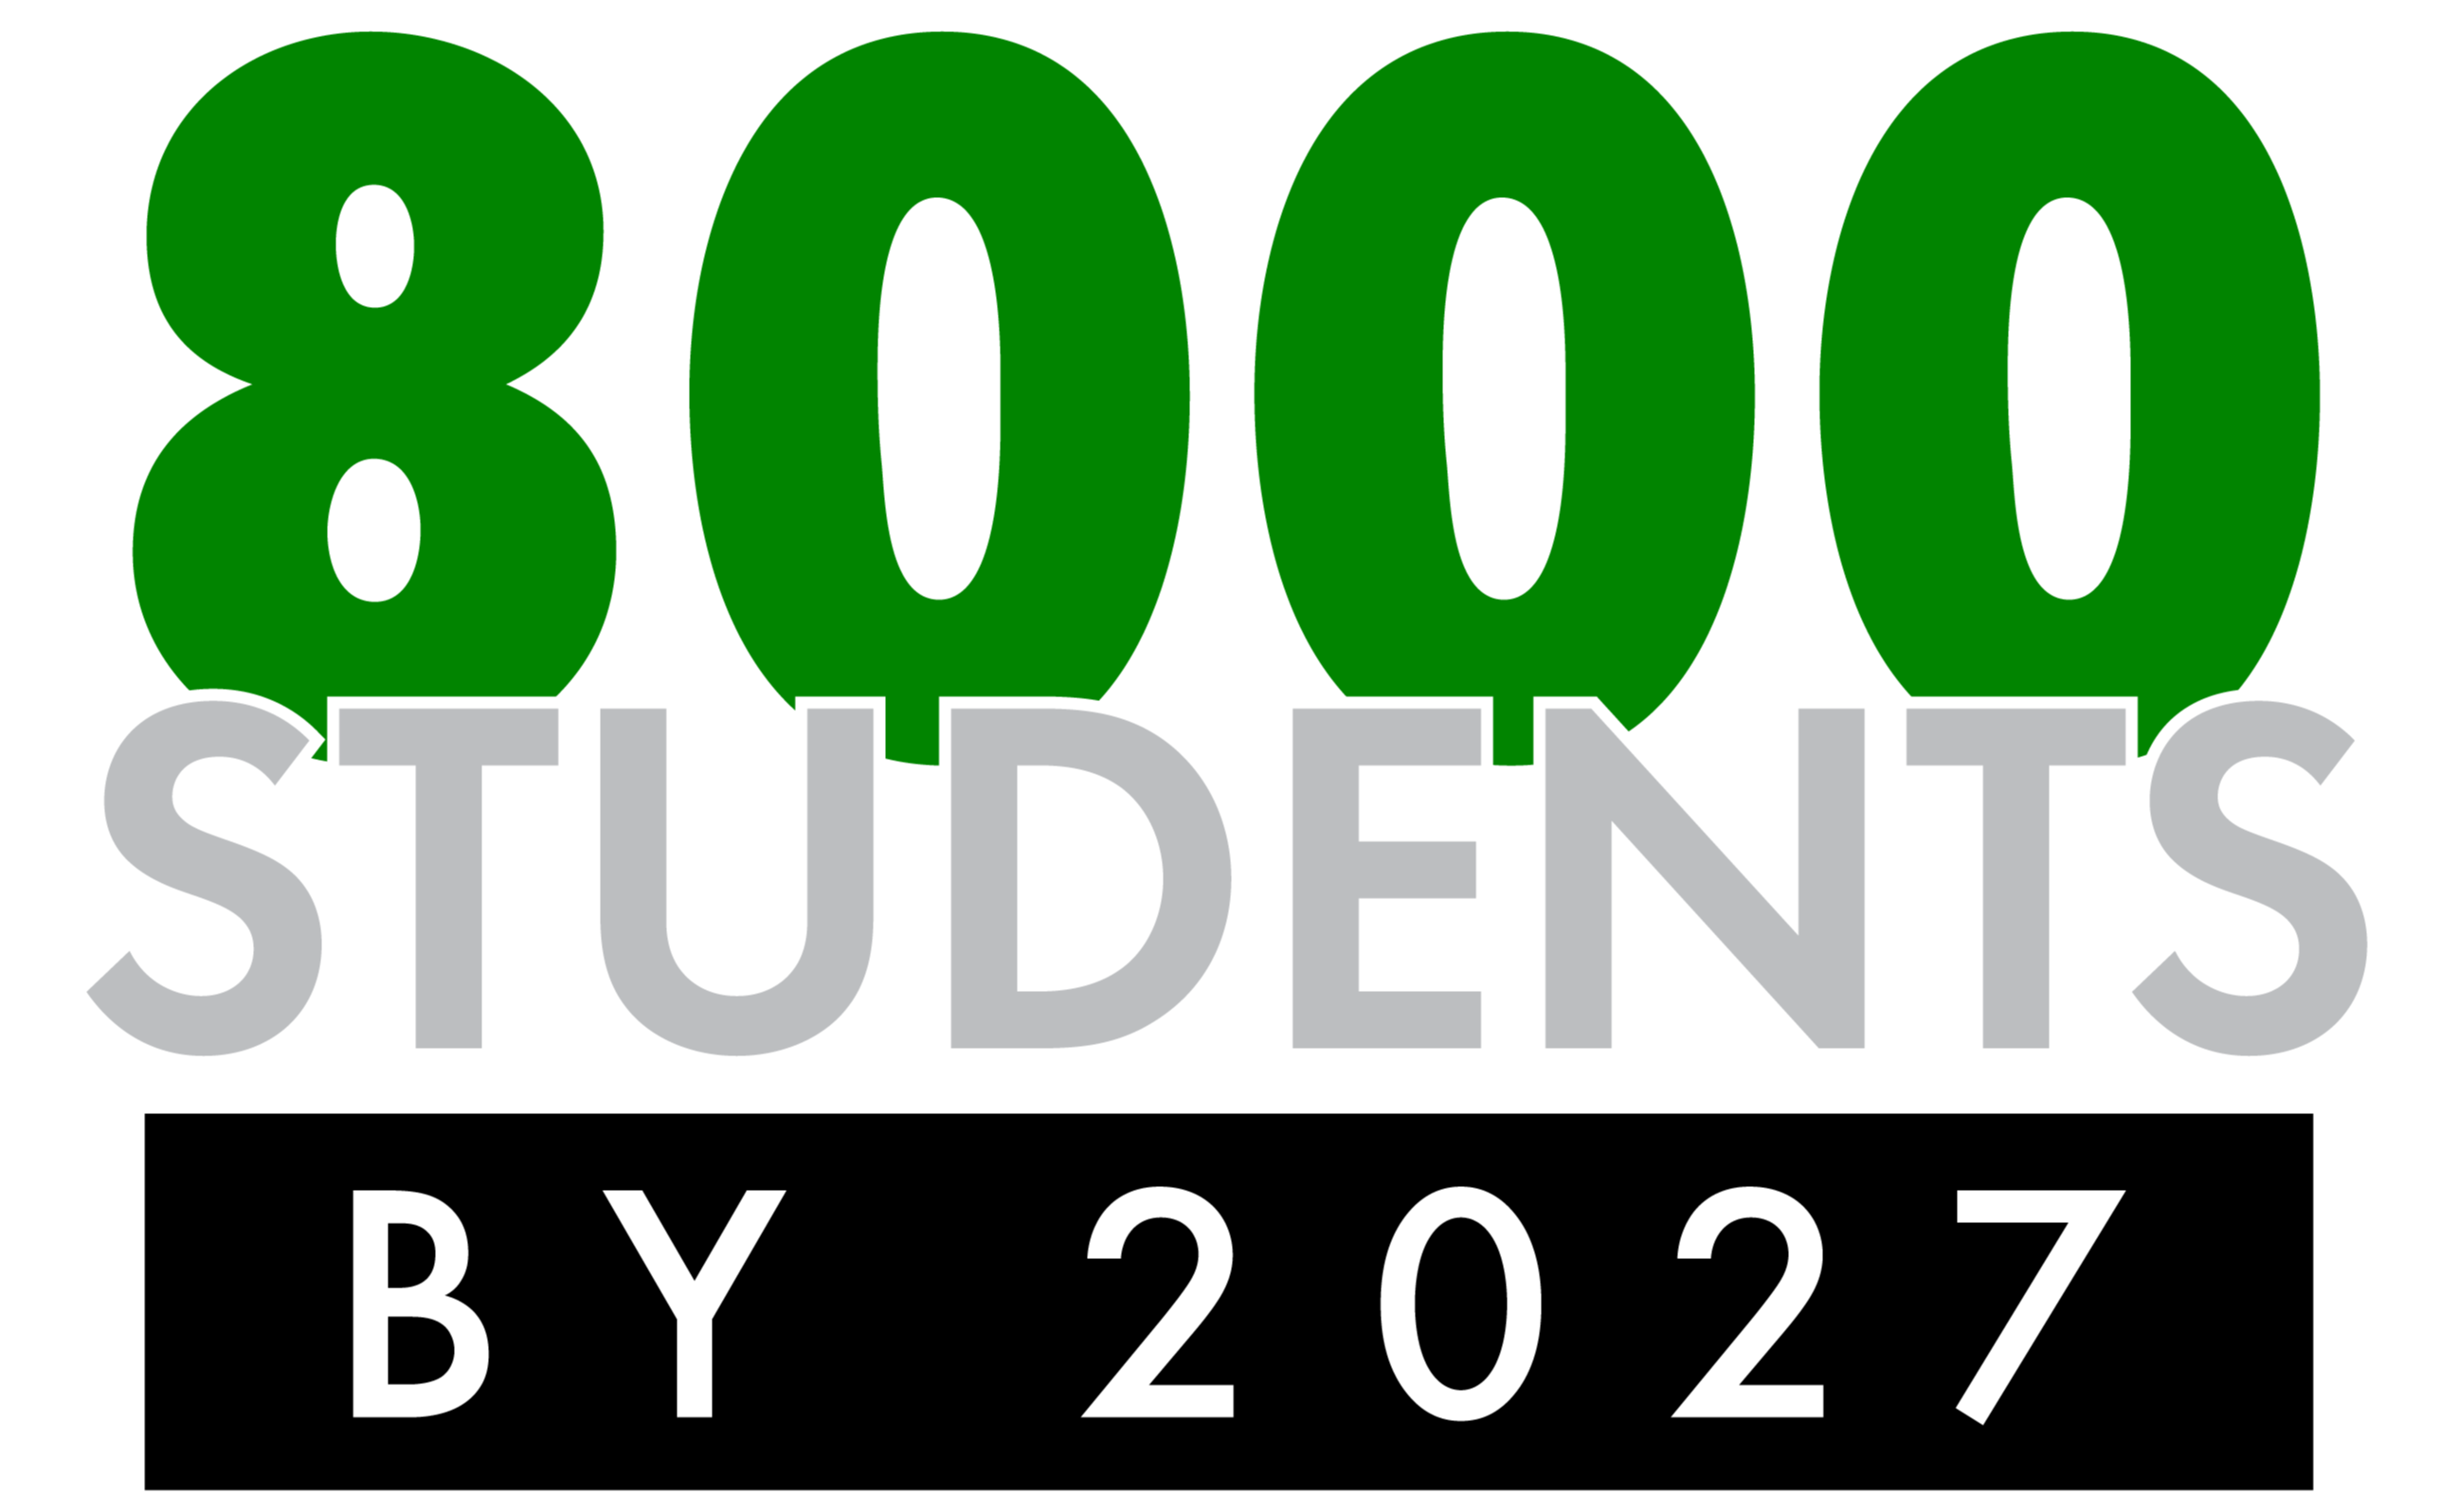 8000 students by 2027